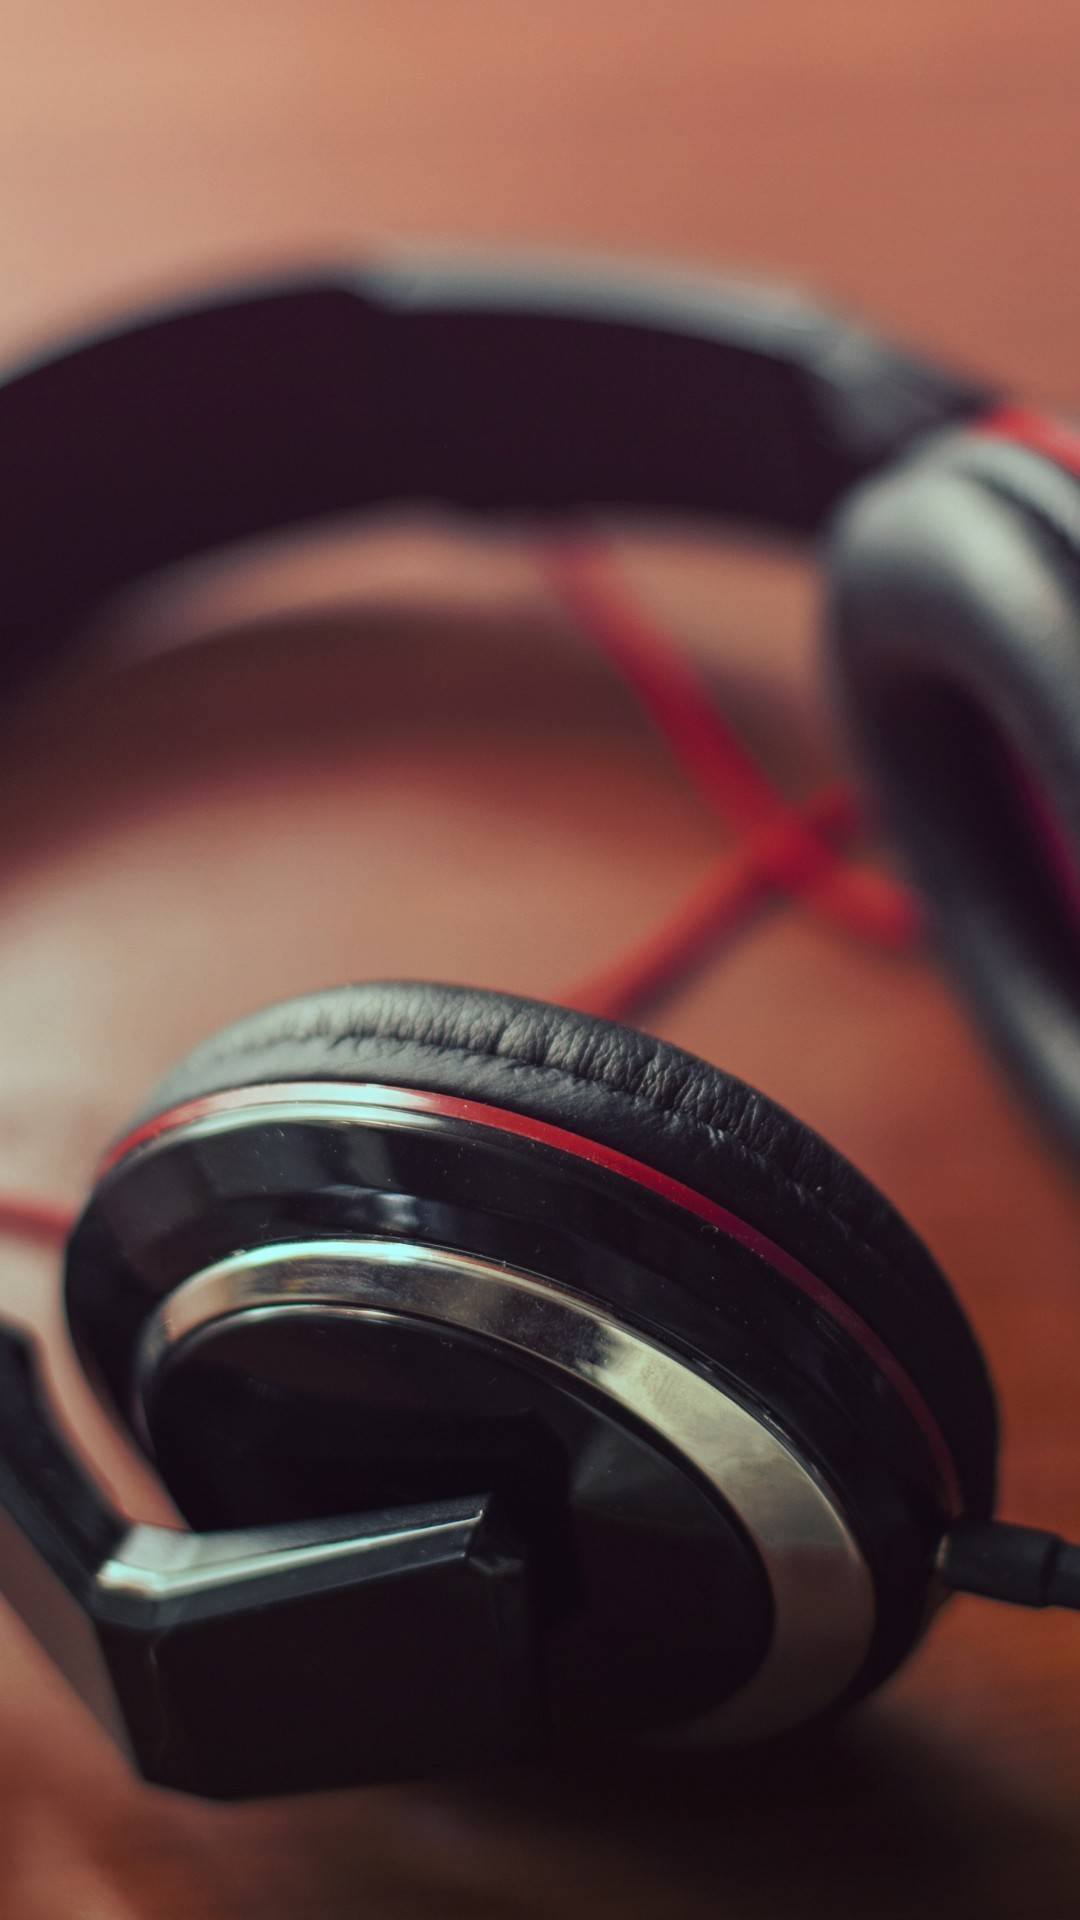 Headphones Wallpaper 1080p Hd - Hd Wallpapers 1080p For Android Mobile - HD Wallpaper 